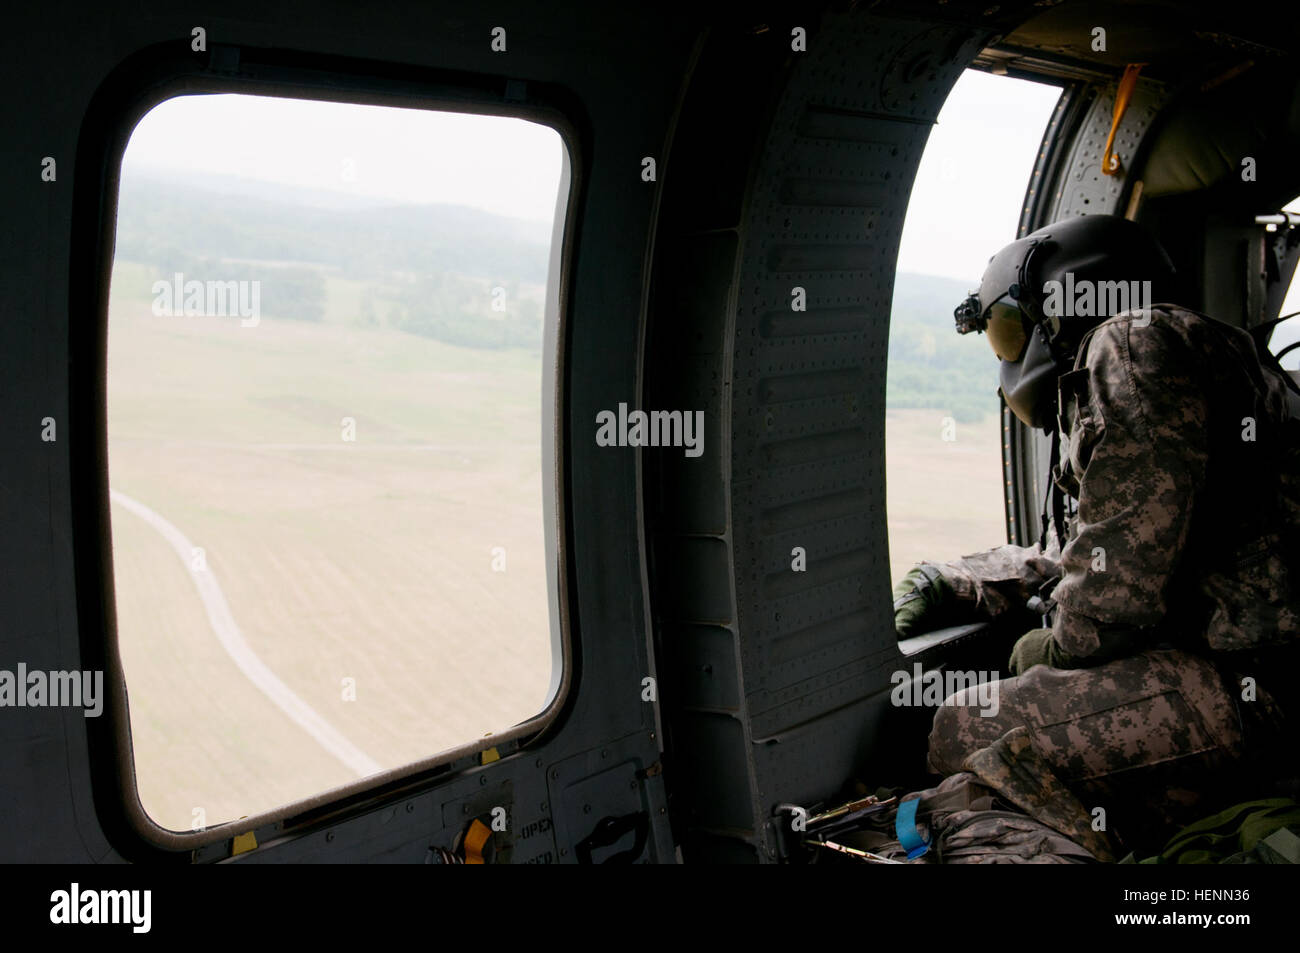 Spc. Kristopher Stovall, a flight medic from the 2nd Battalion, 4th Aviation Regiment, General Support Aviation Battalion, and native of Weatherford, Texas, looks out a window of a UH-60 Black Hawk helicopter during Vibrant Response '14 July 24. Flight medics are the next level of care for patients, after the first responders on the ground. Where first responders apply life-saving aid, flight medics stabilize patients on the helicopter on the way to the hospital. (U.S. Army photo by Staff Sgt. Ray Boyington) VR '14, A view from the top 140724-A-JR267-106 Stock Photo